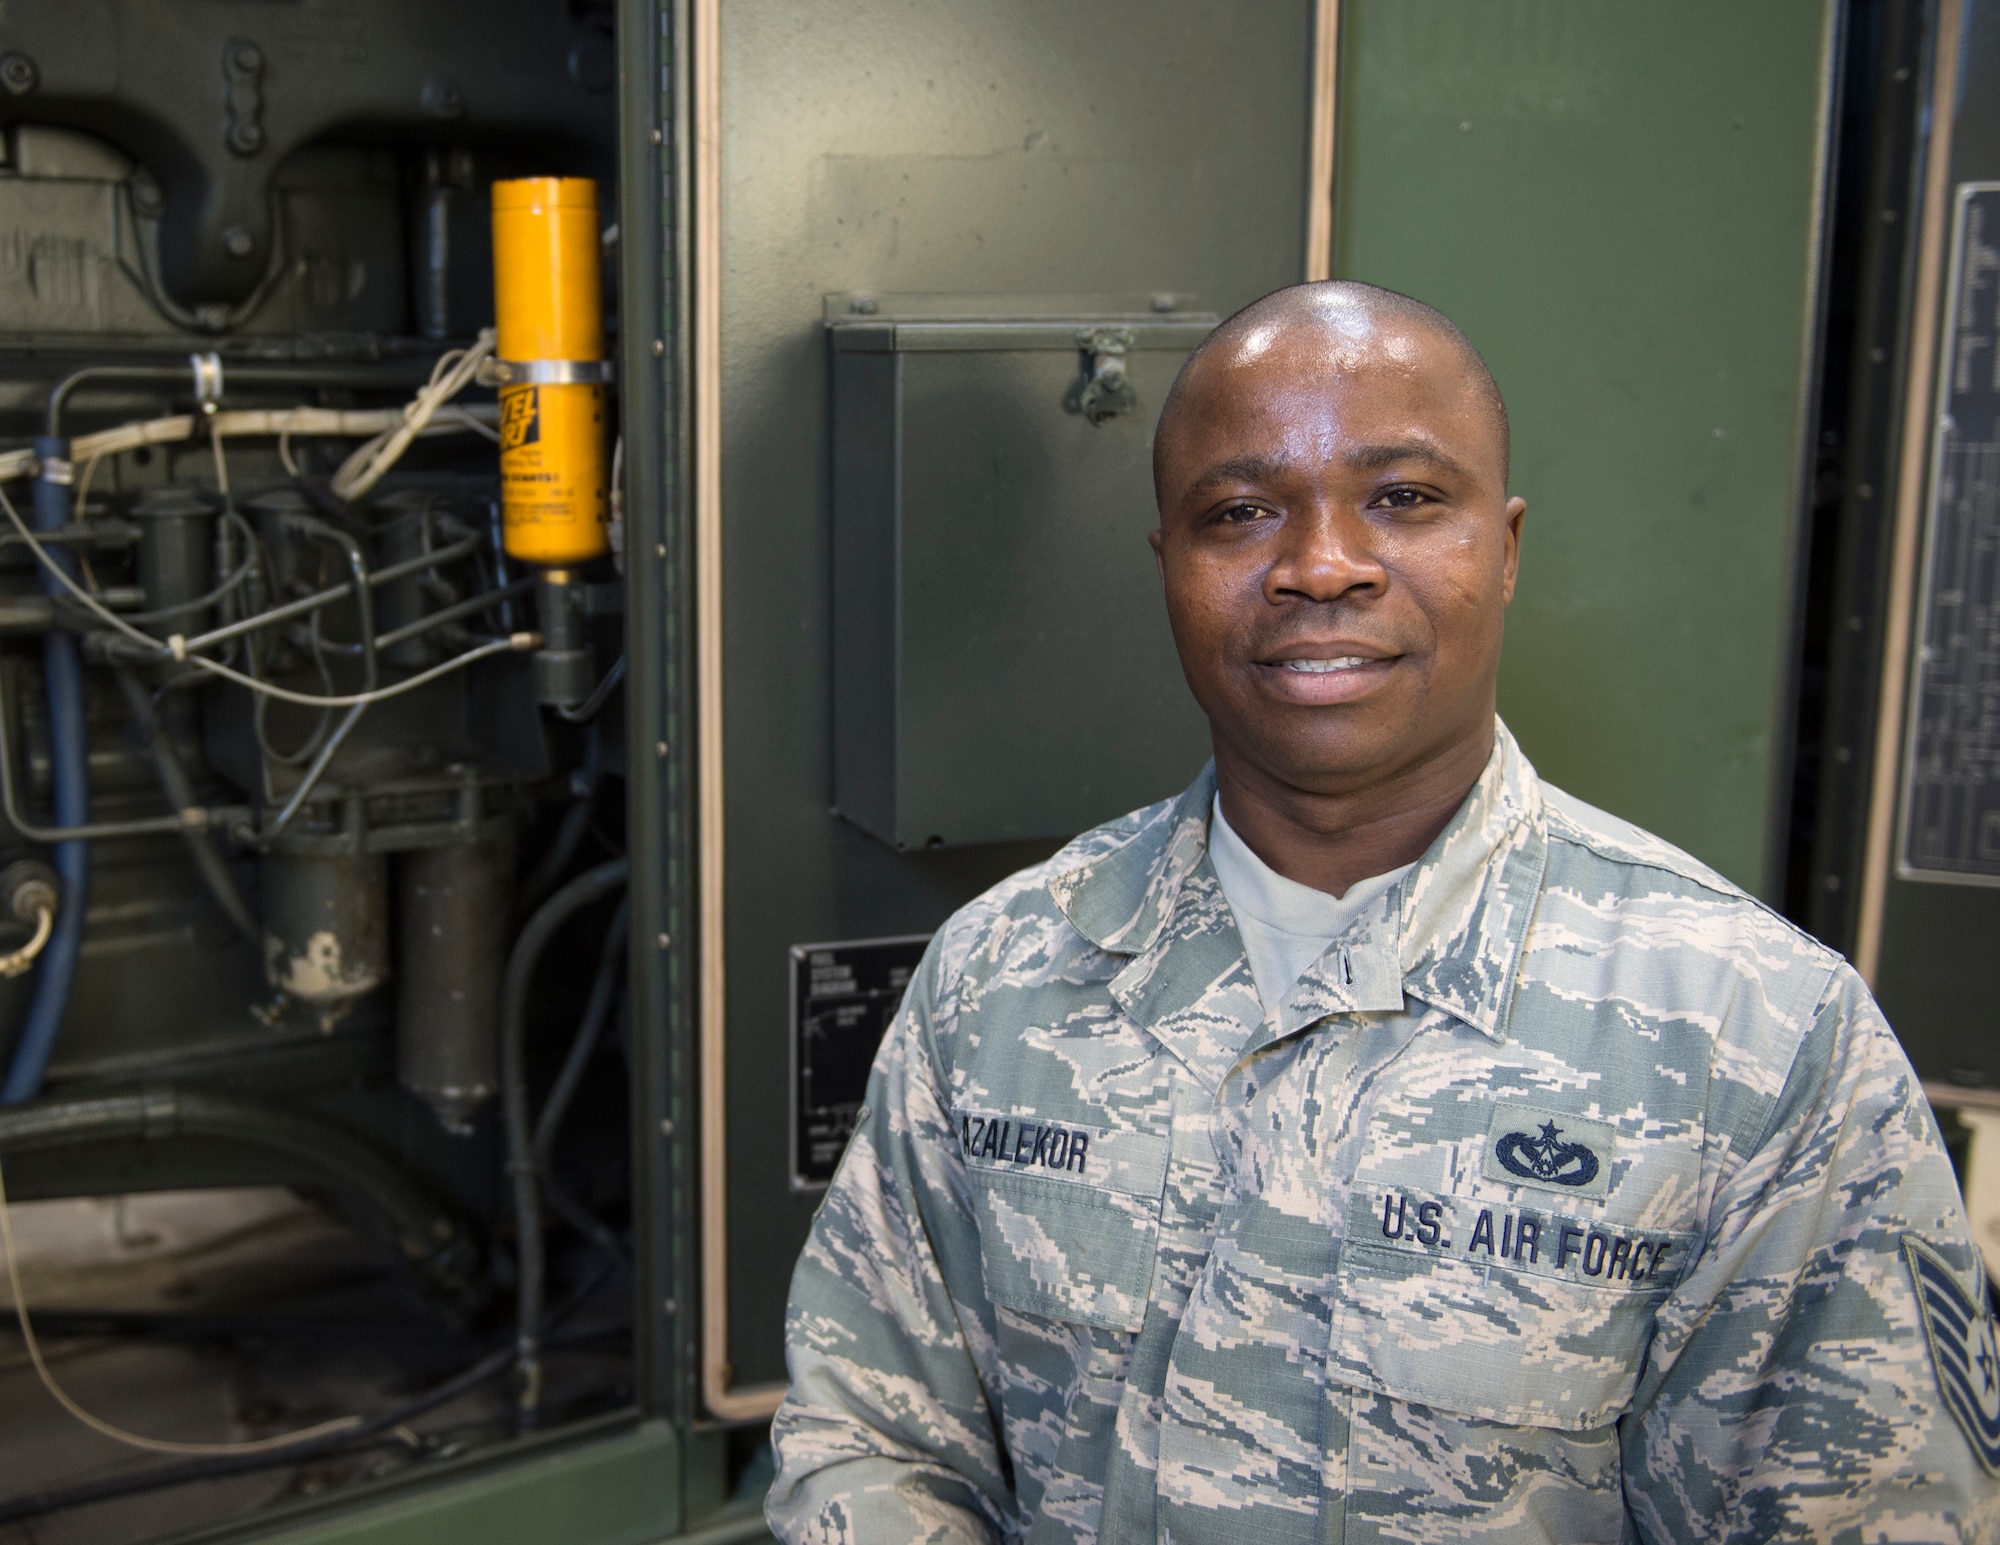 U.S. Air Force Tech. Sgt. Kokou Azalekor, an electrical power production technician with the 133rd Civil Engineer Squadron, poses for a photograph in St. Paul, Minn., Feb. 12, 2020.